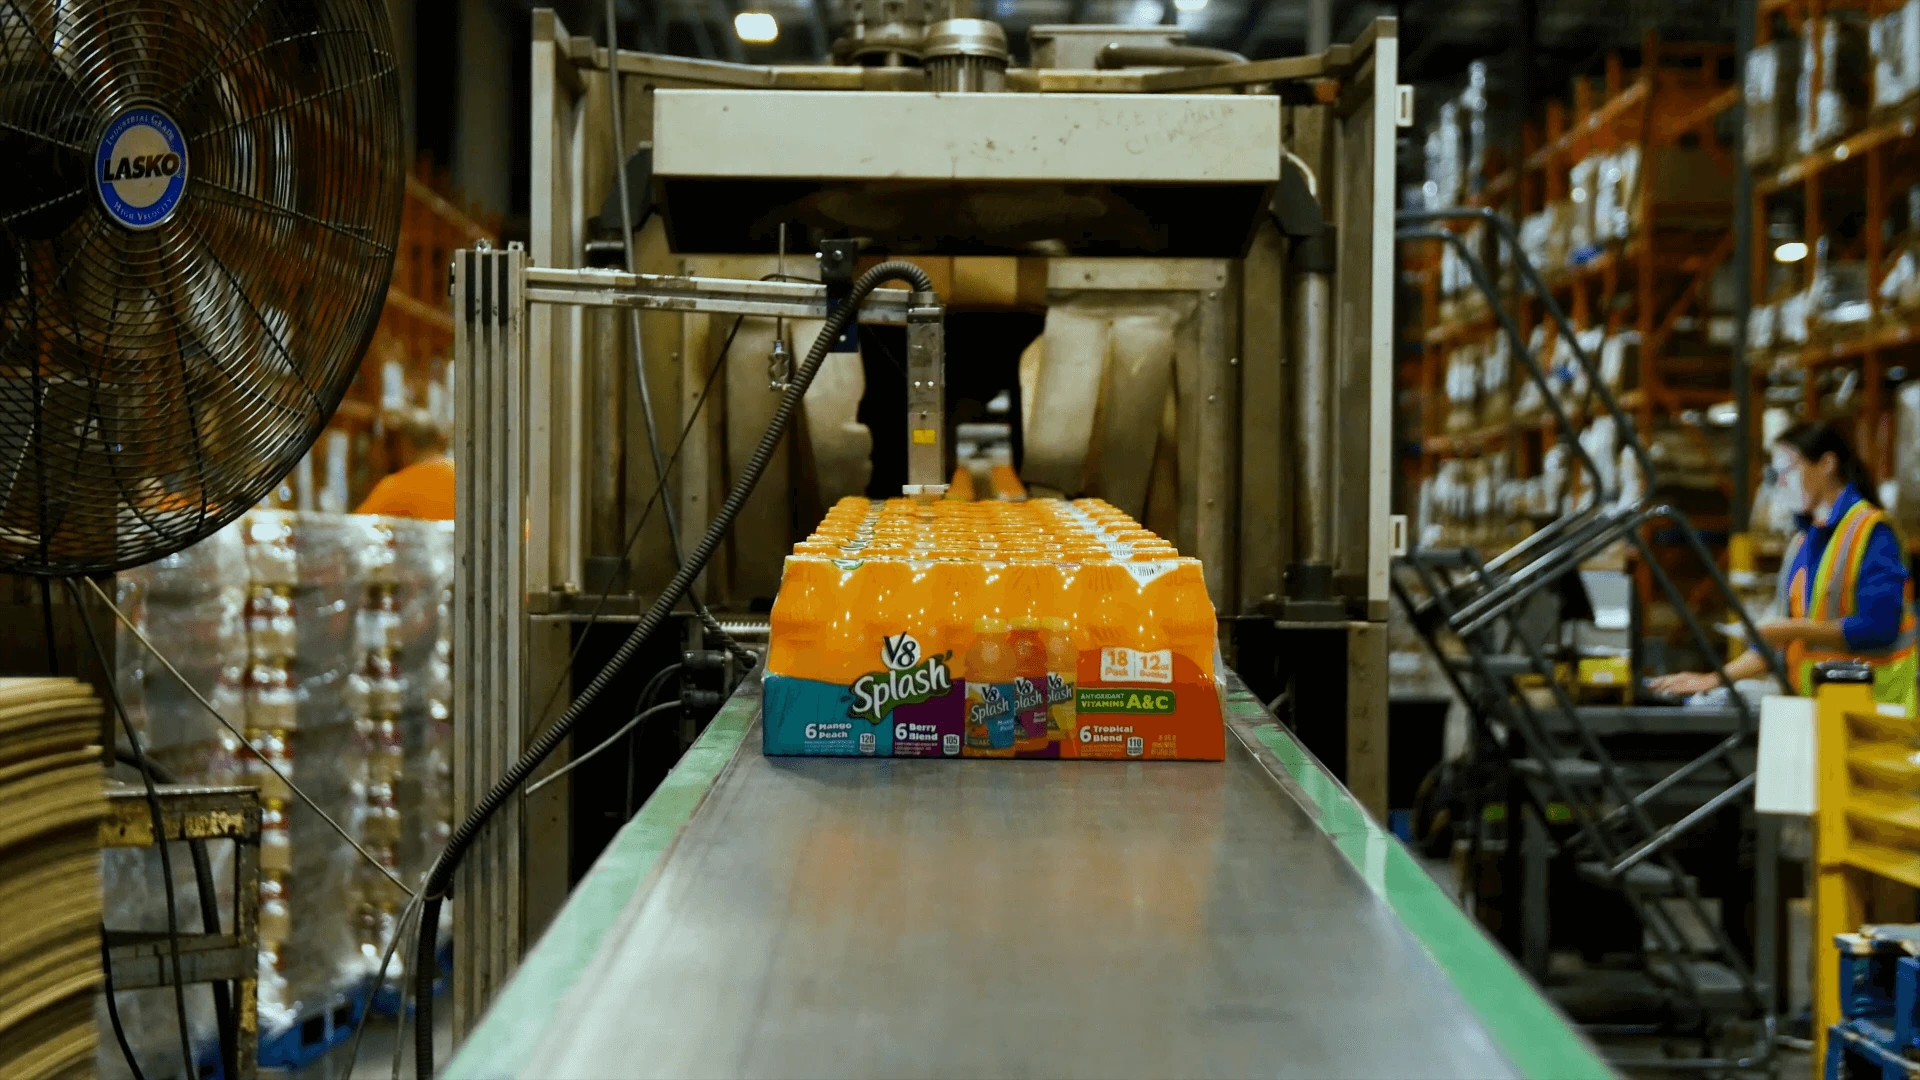 Package of V8 juice being packaged and processed on product line